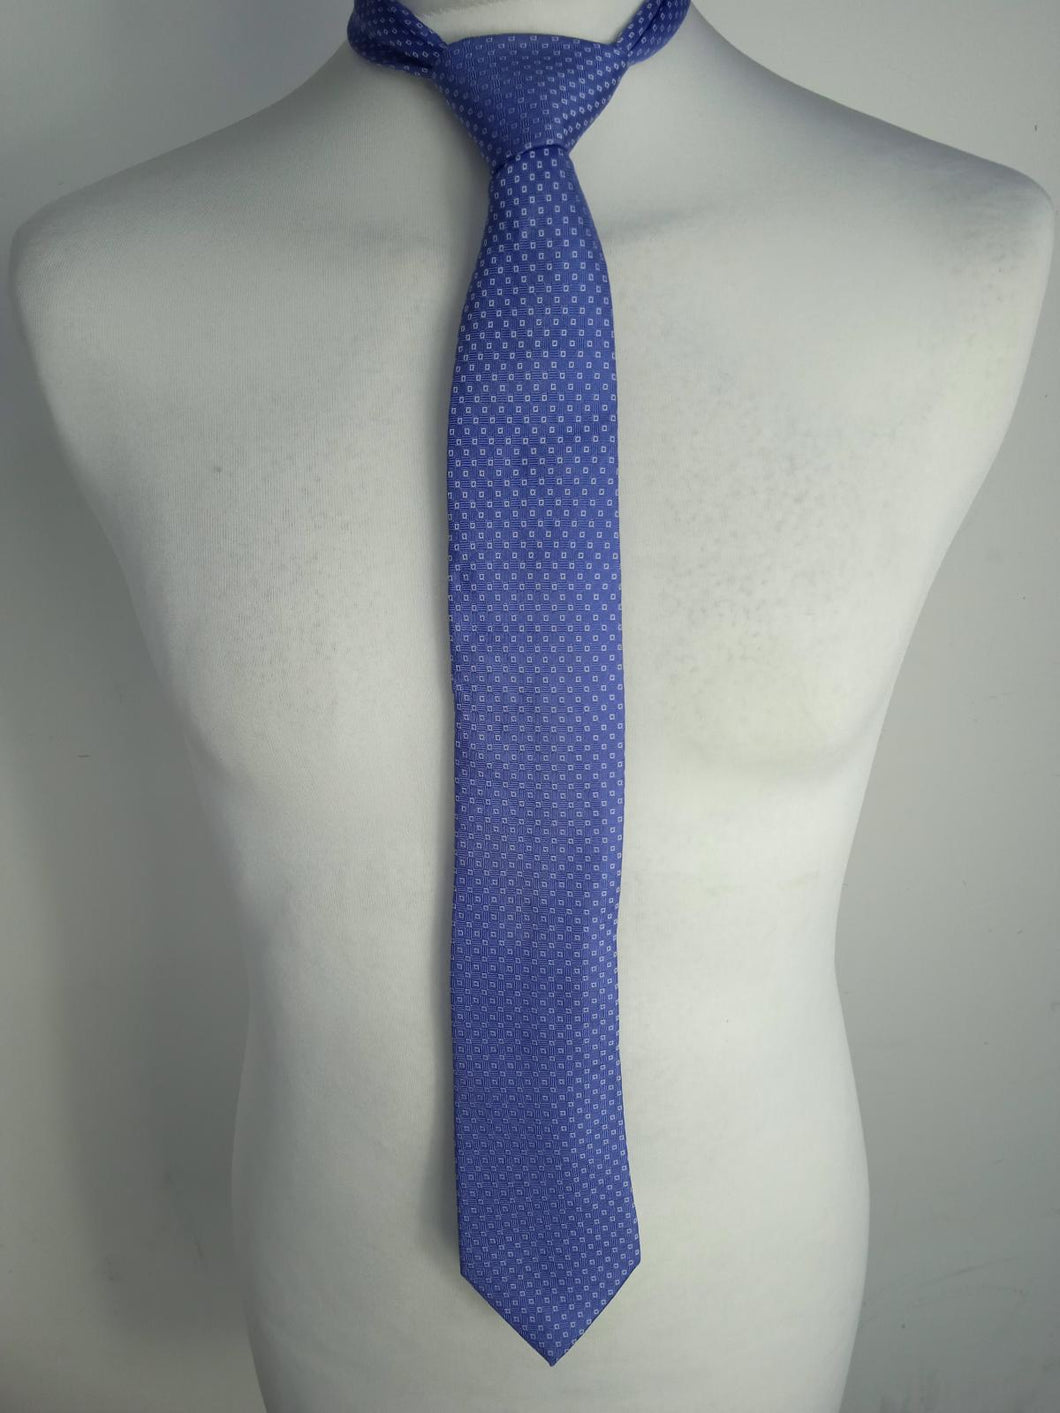 JOHN FRANCOMB Men?s Blue Silk Square Pattern Pointed Tie One Size